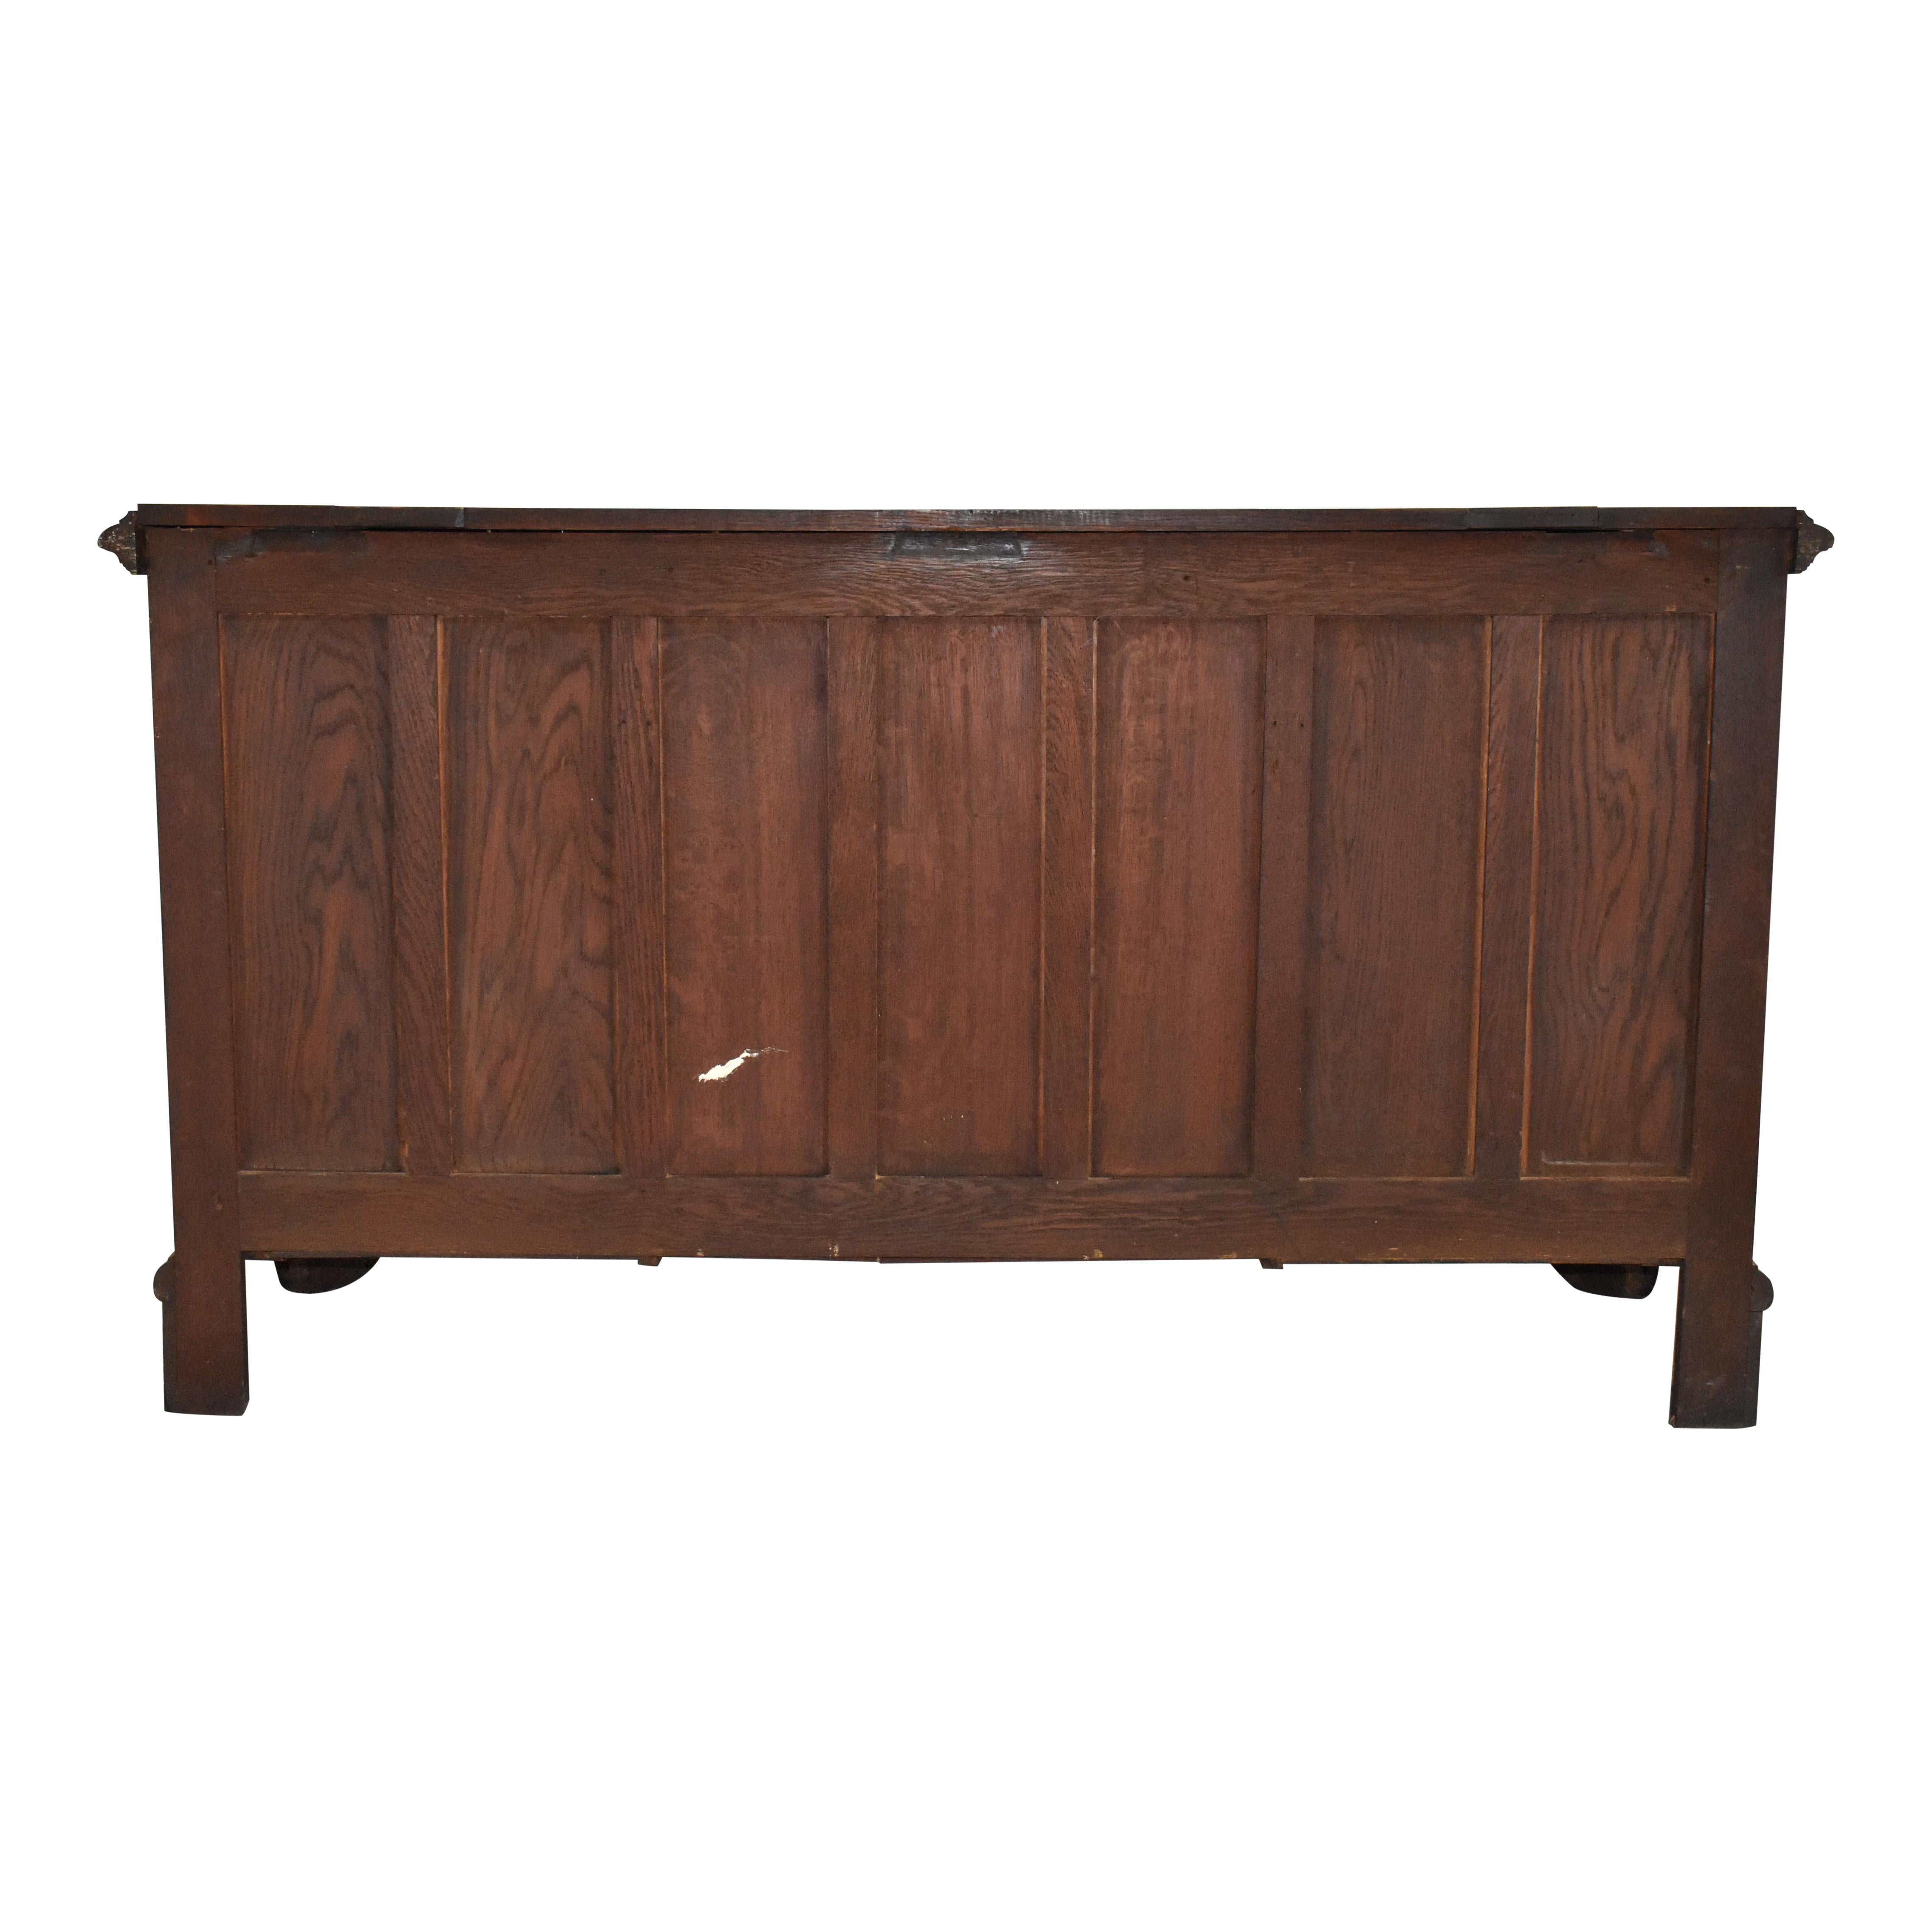 English Carved Oak Sideboard Buffet with Liquor Tray For Sale 13